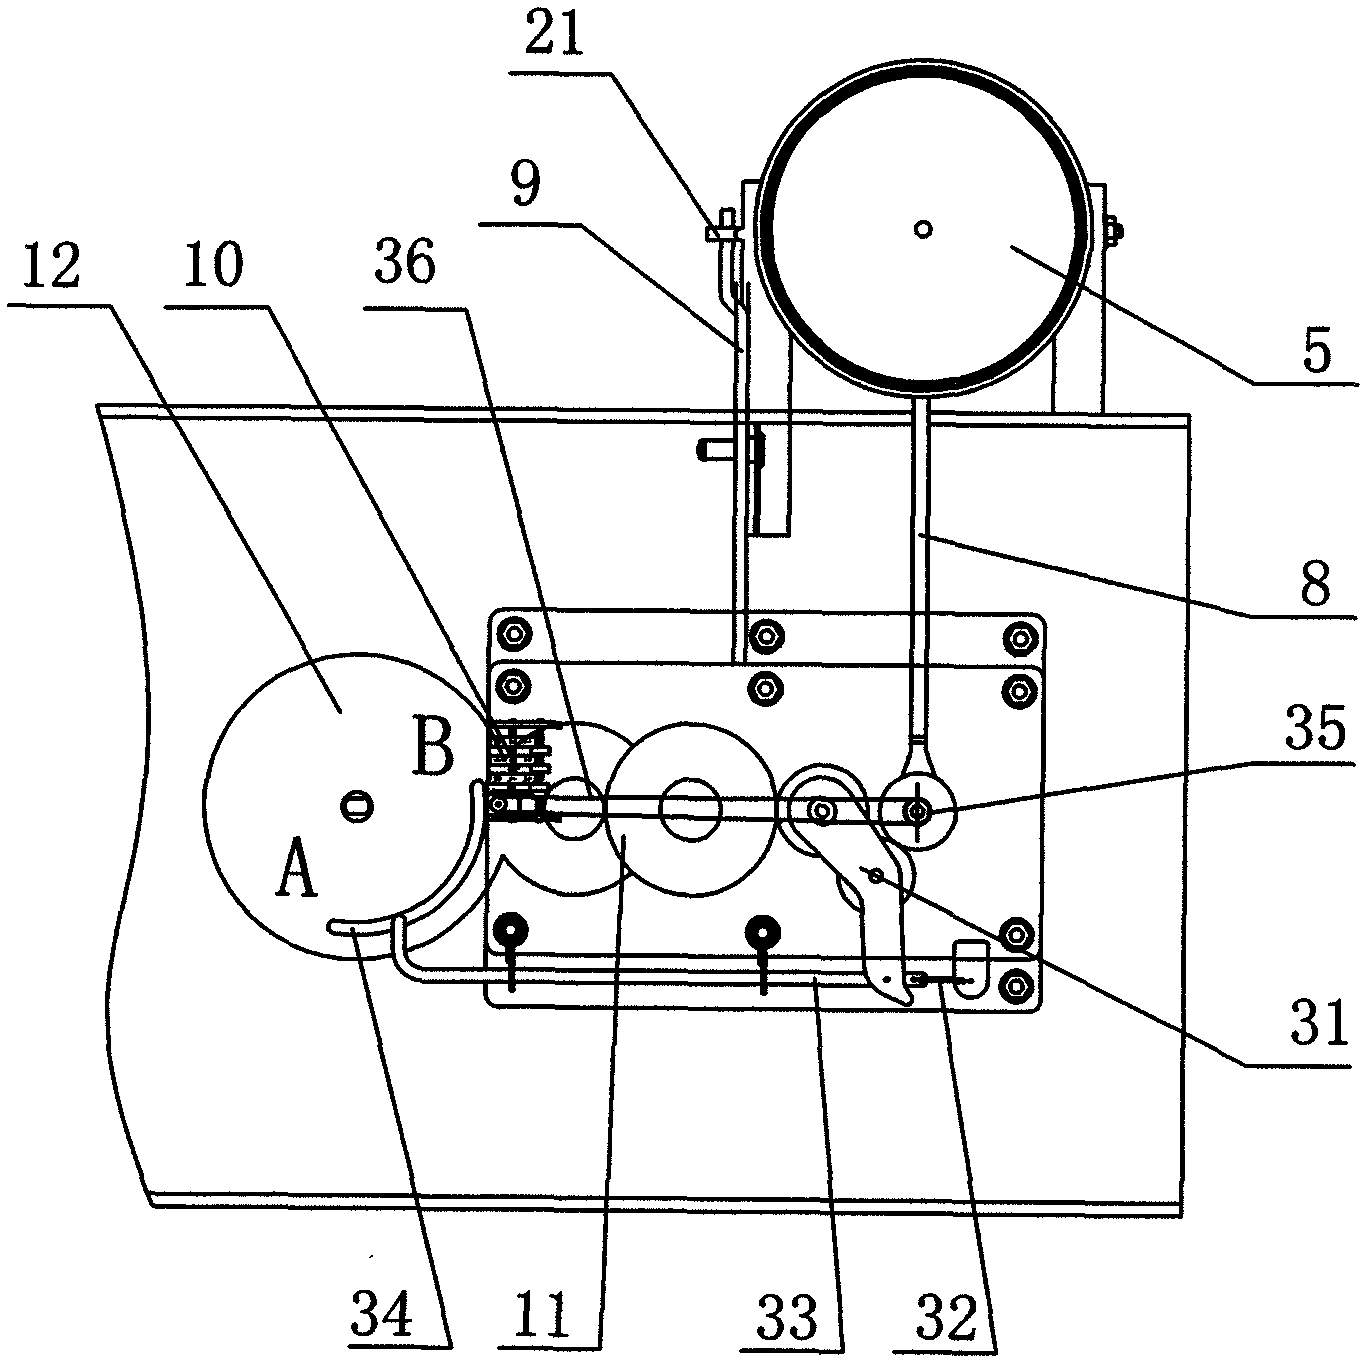 Large flow mechanical self-controlling valve for irrigating paddy fields